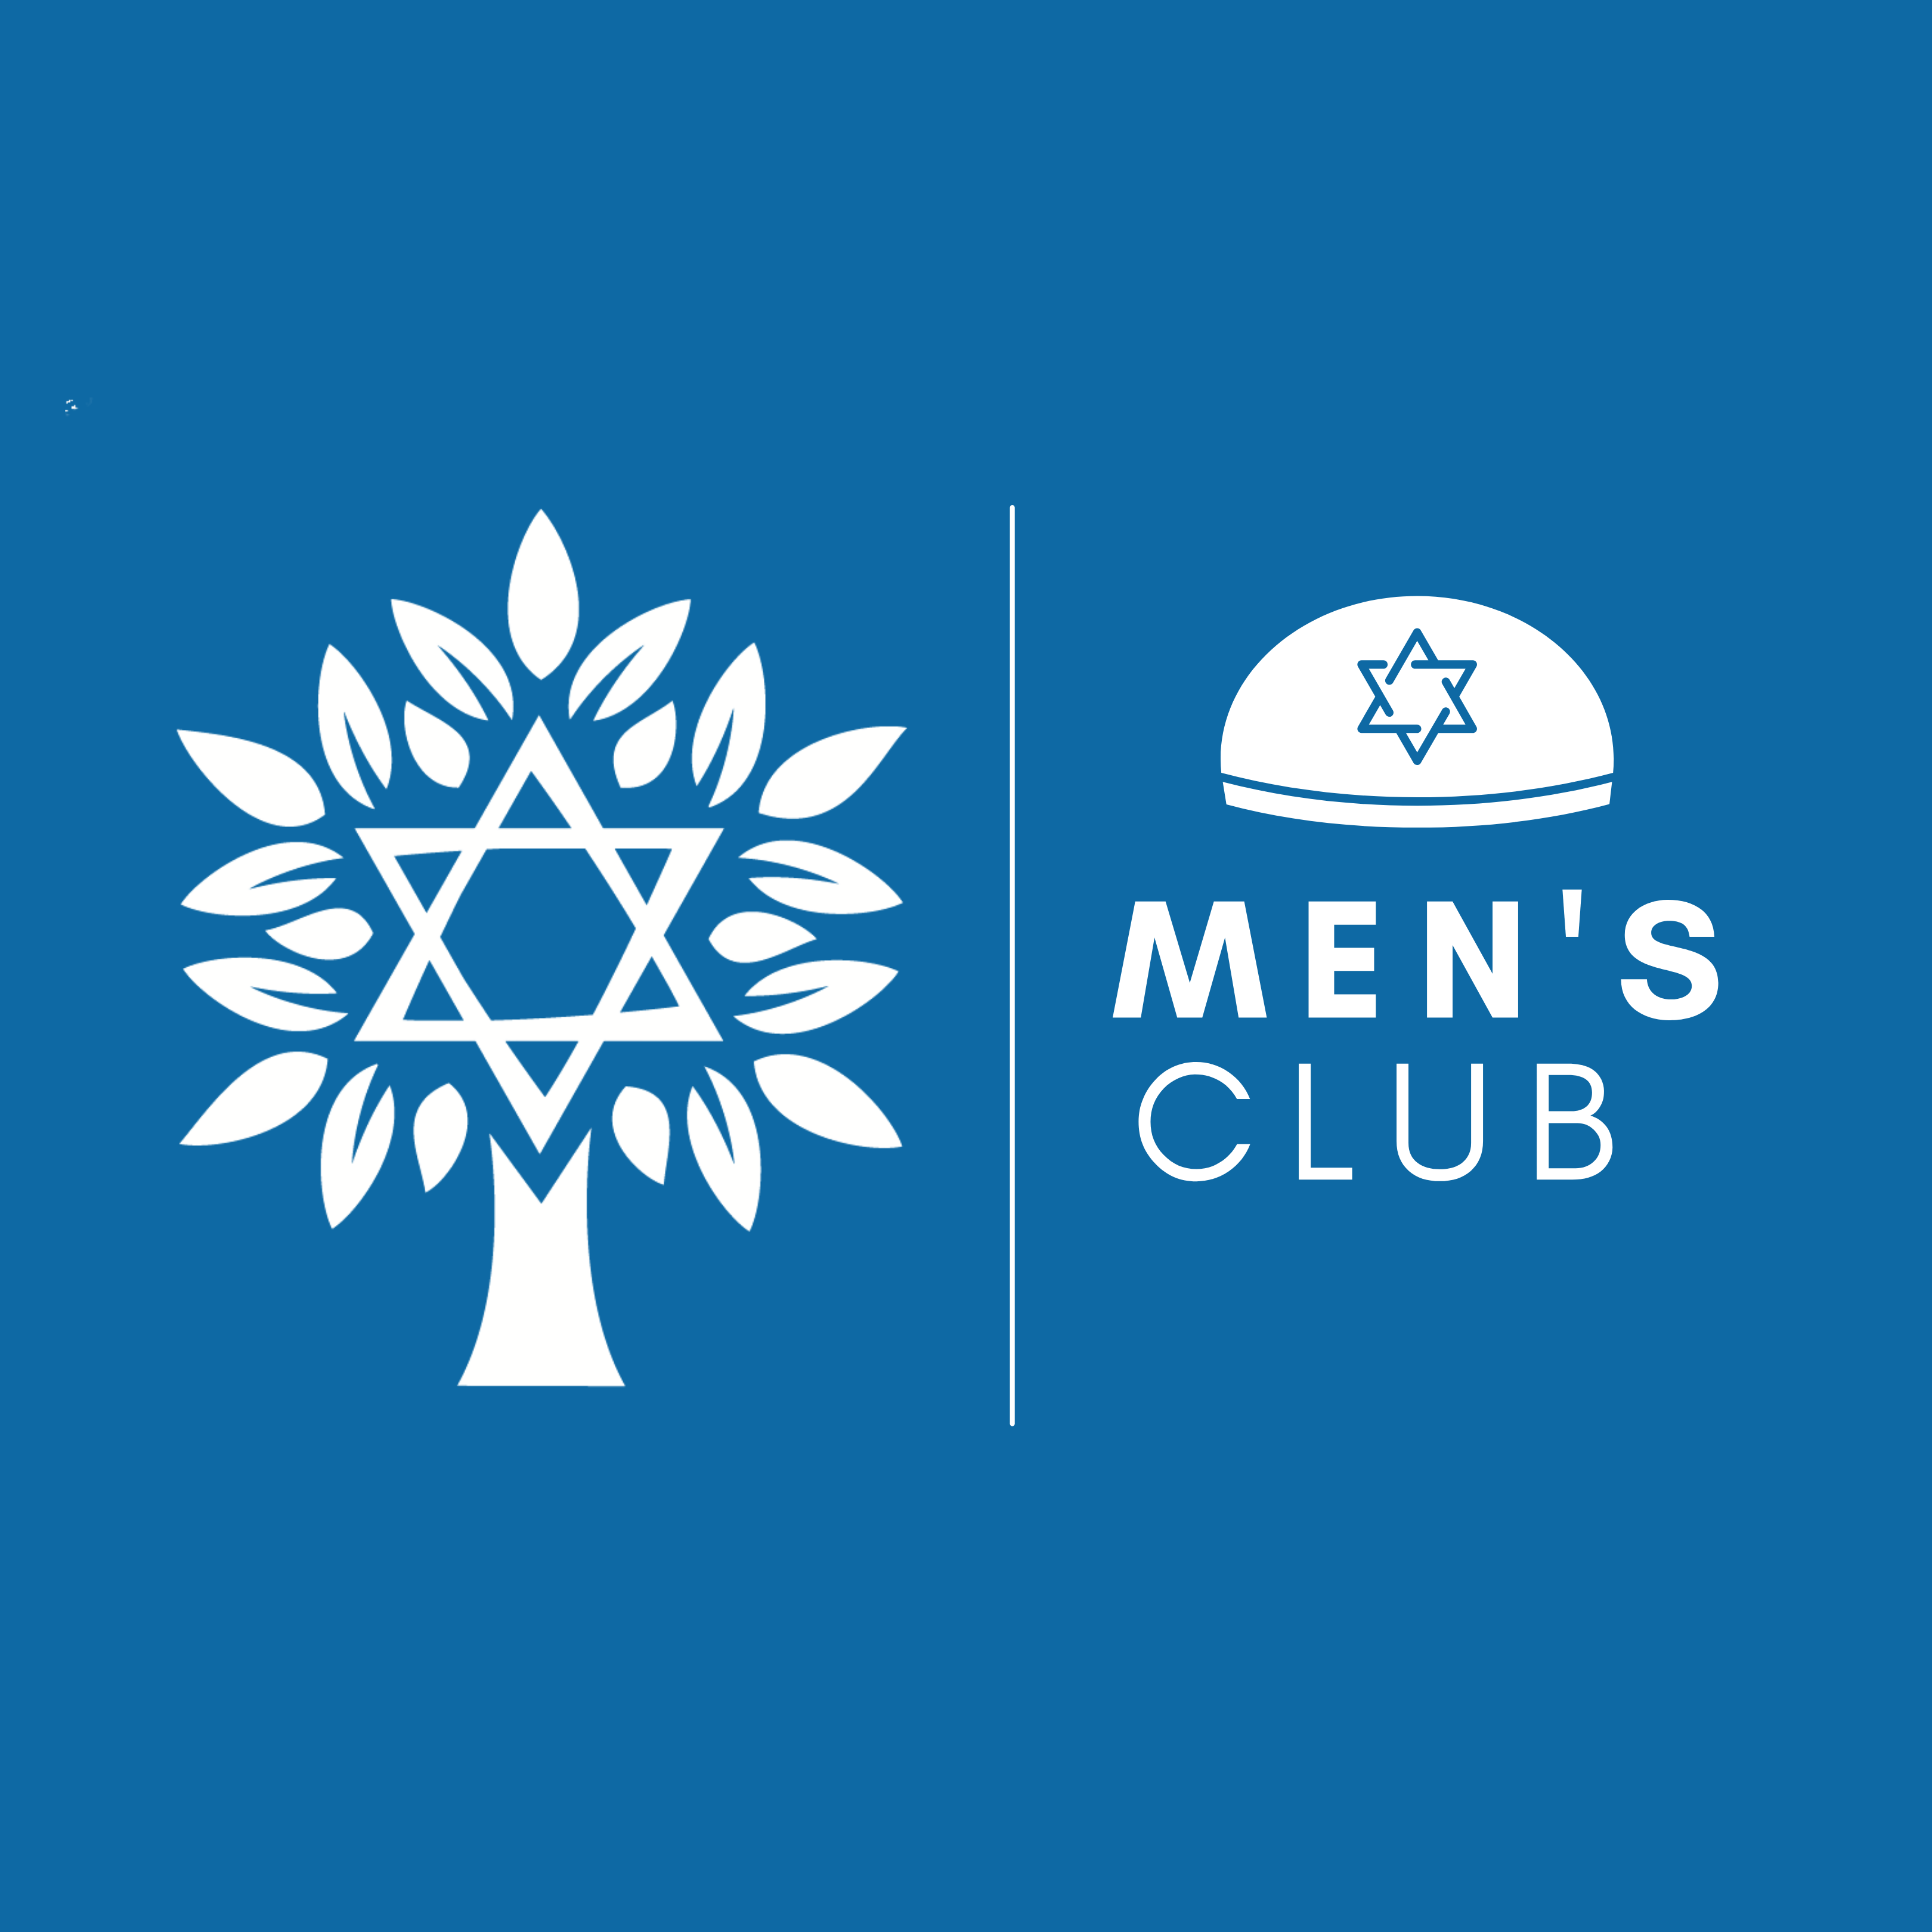 Men's Club Presents - Adventures in Learning